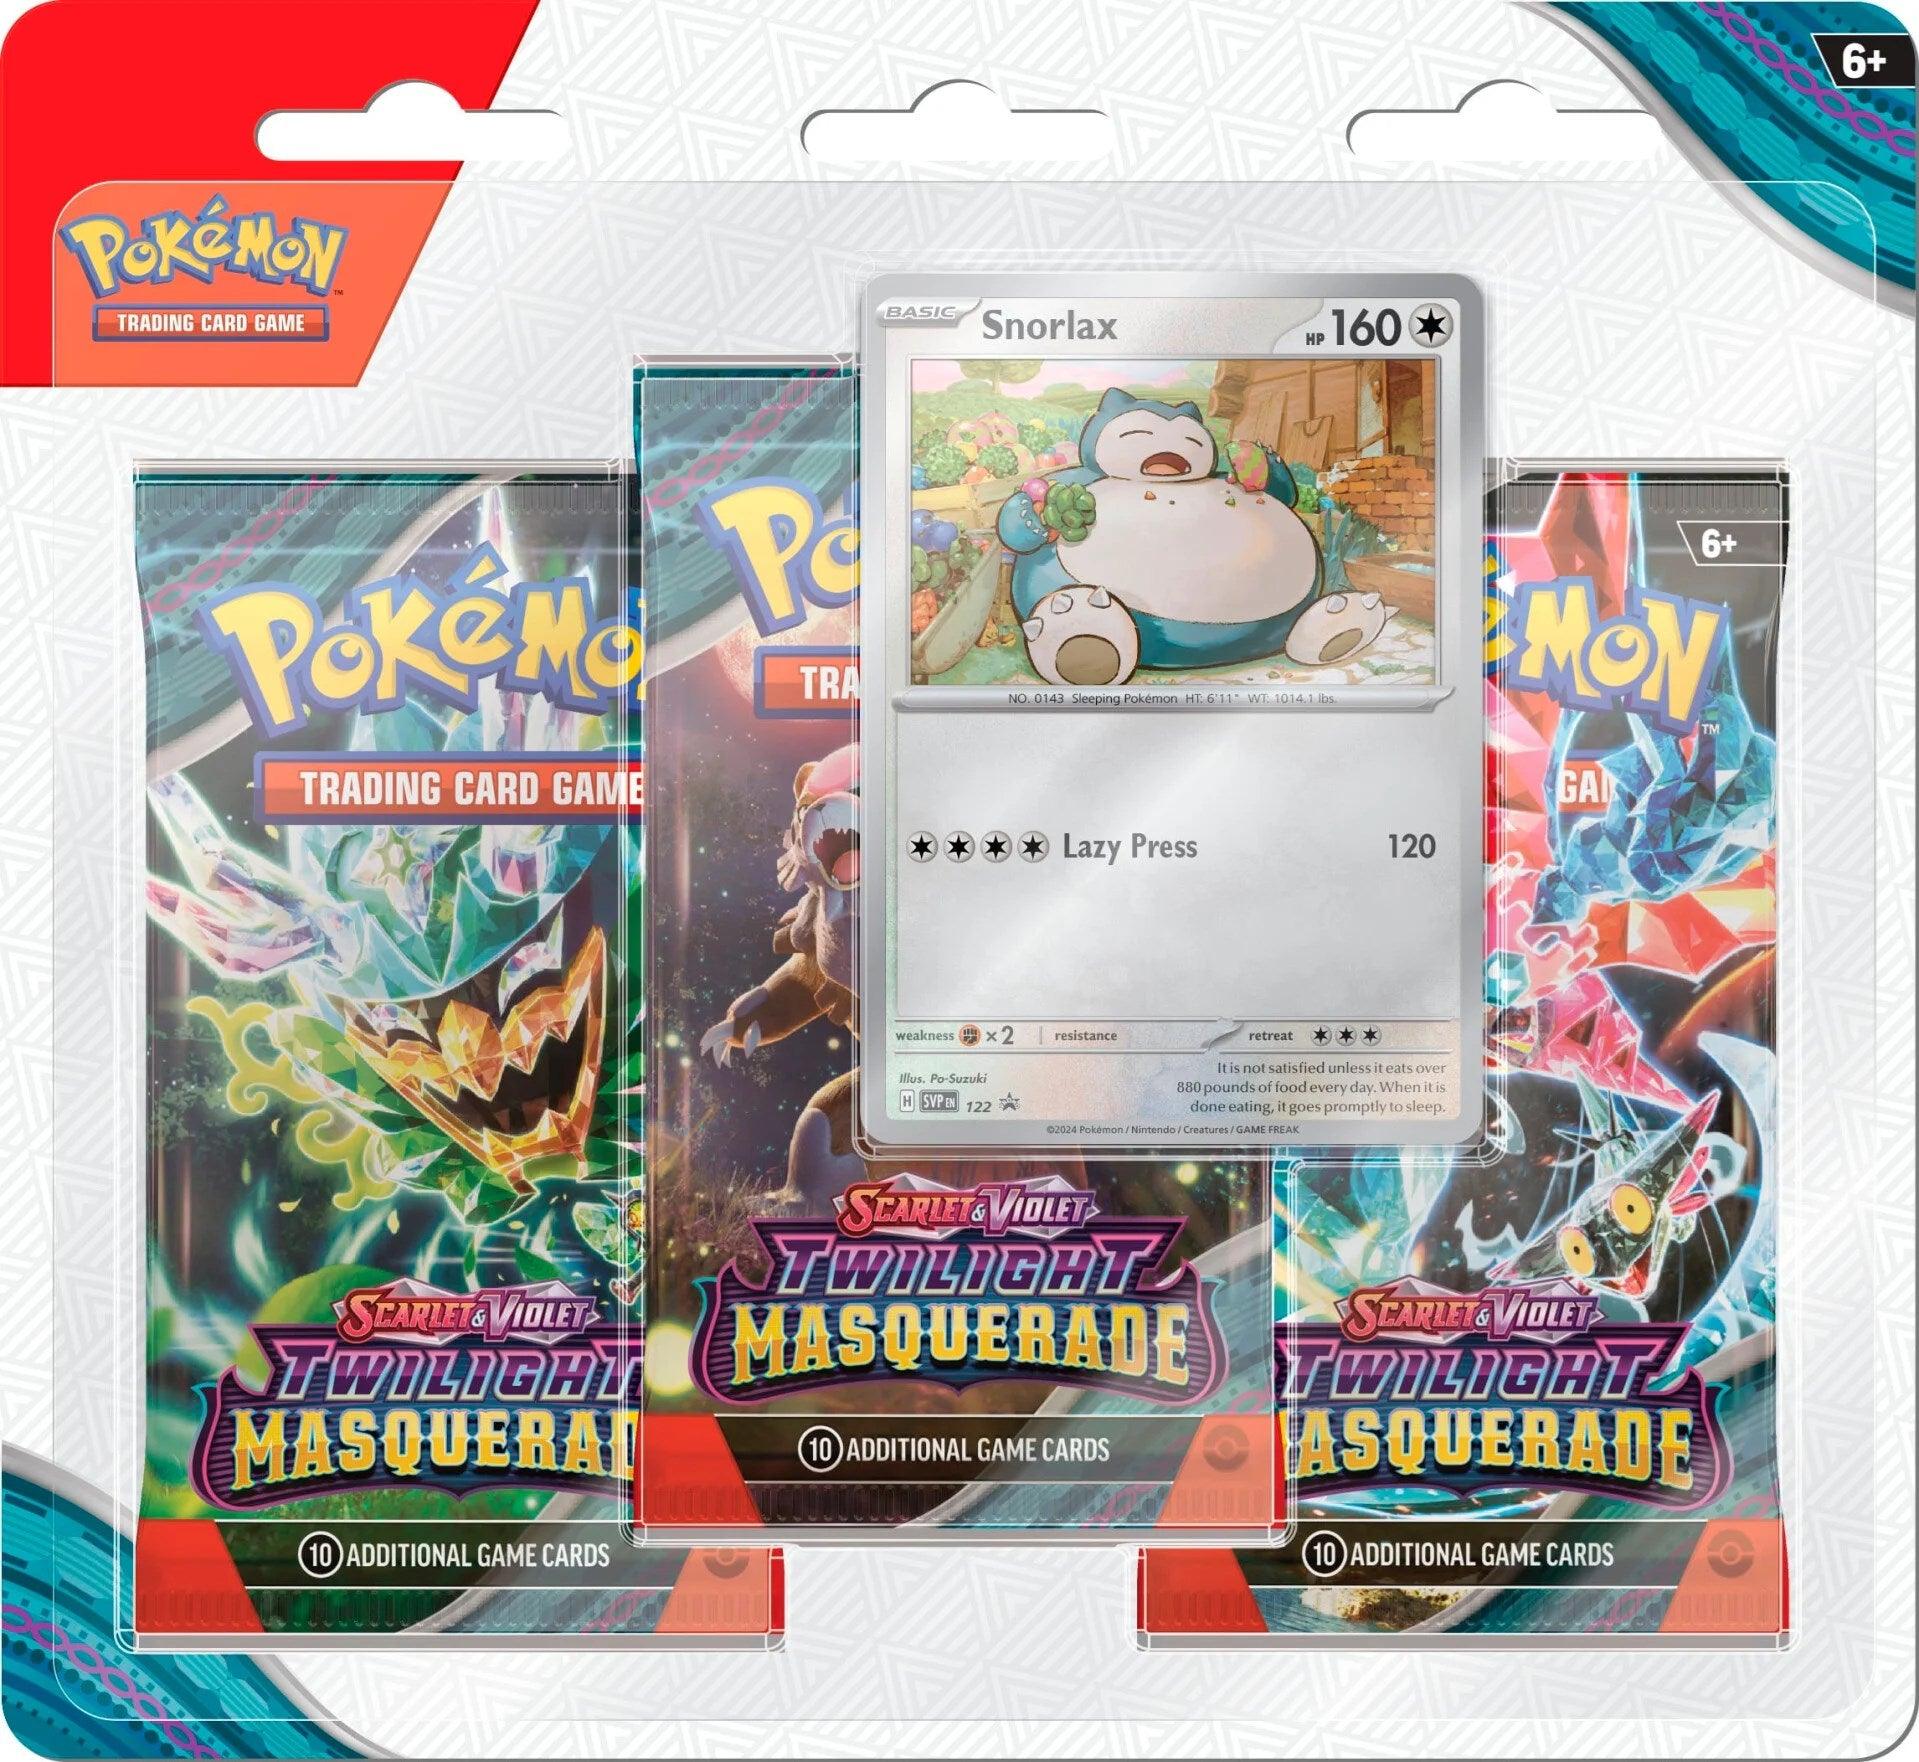 Scarlet & Violet: Twilight Masquerade - 3-Pack Blisters (Snorlax) - Josh's Cards